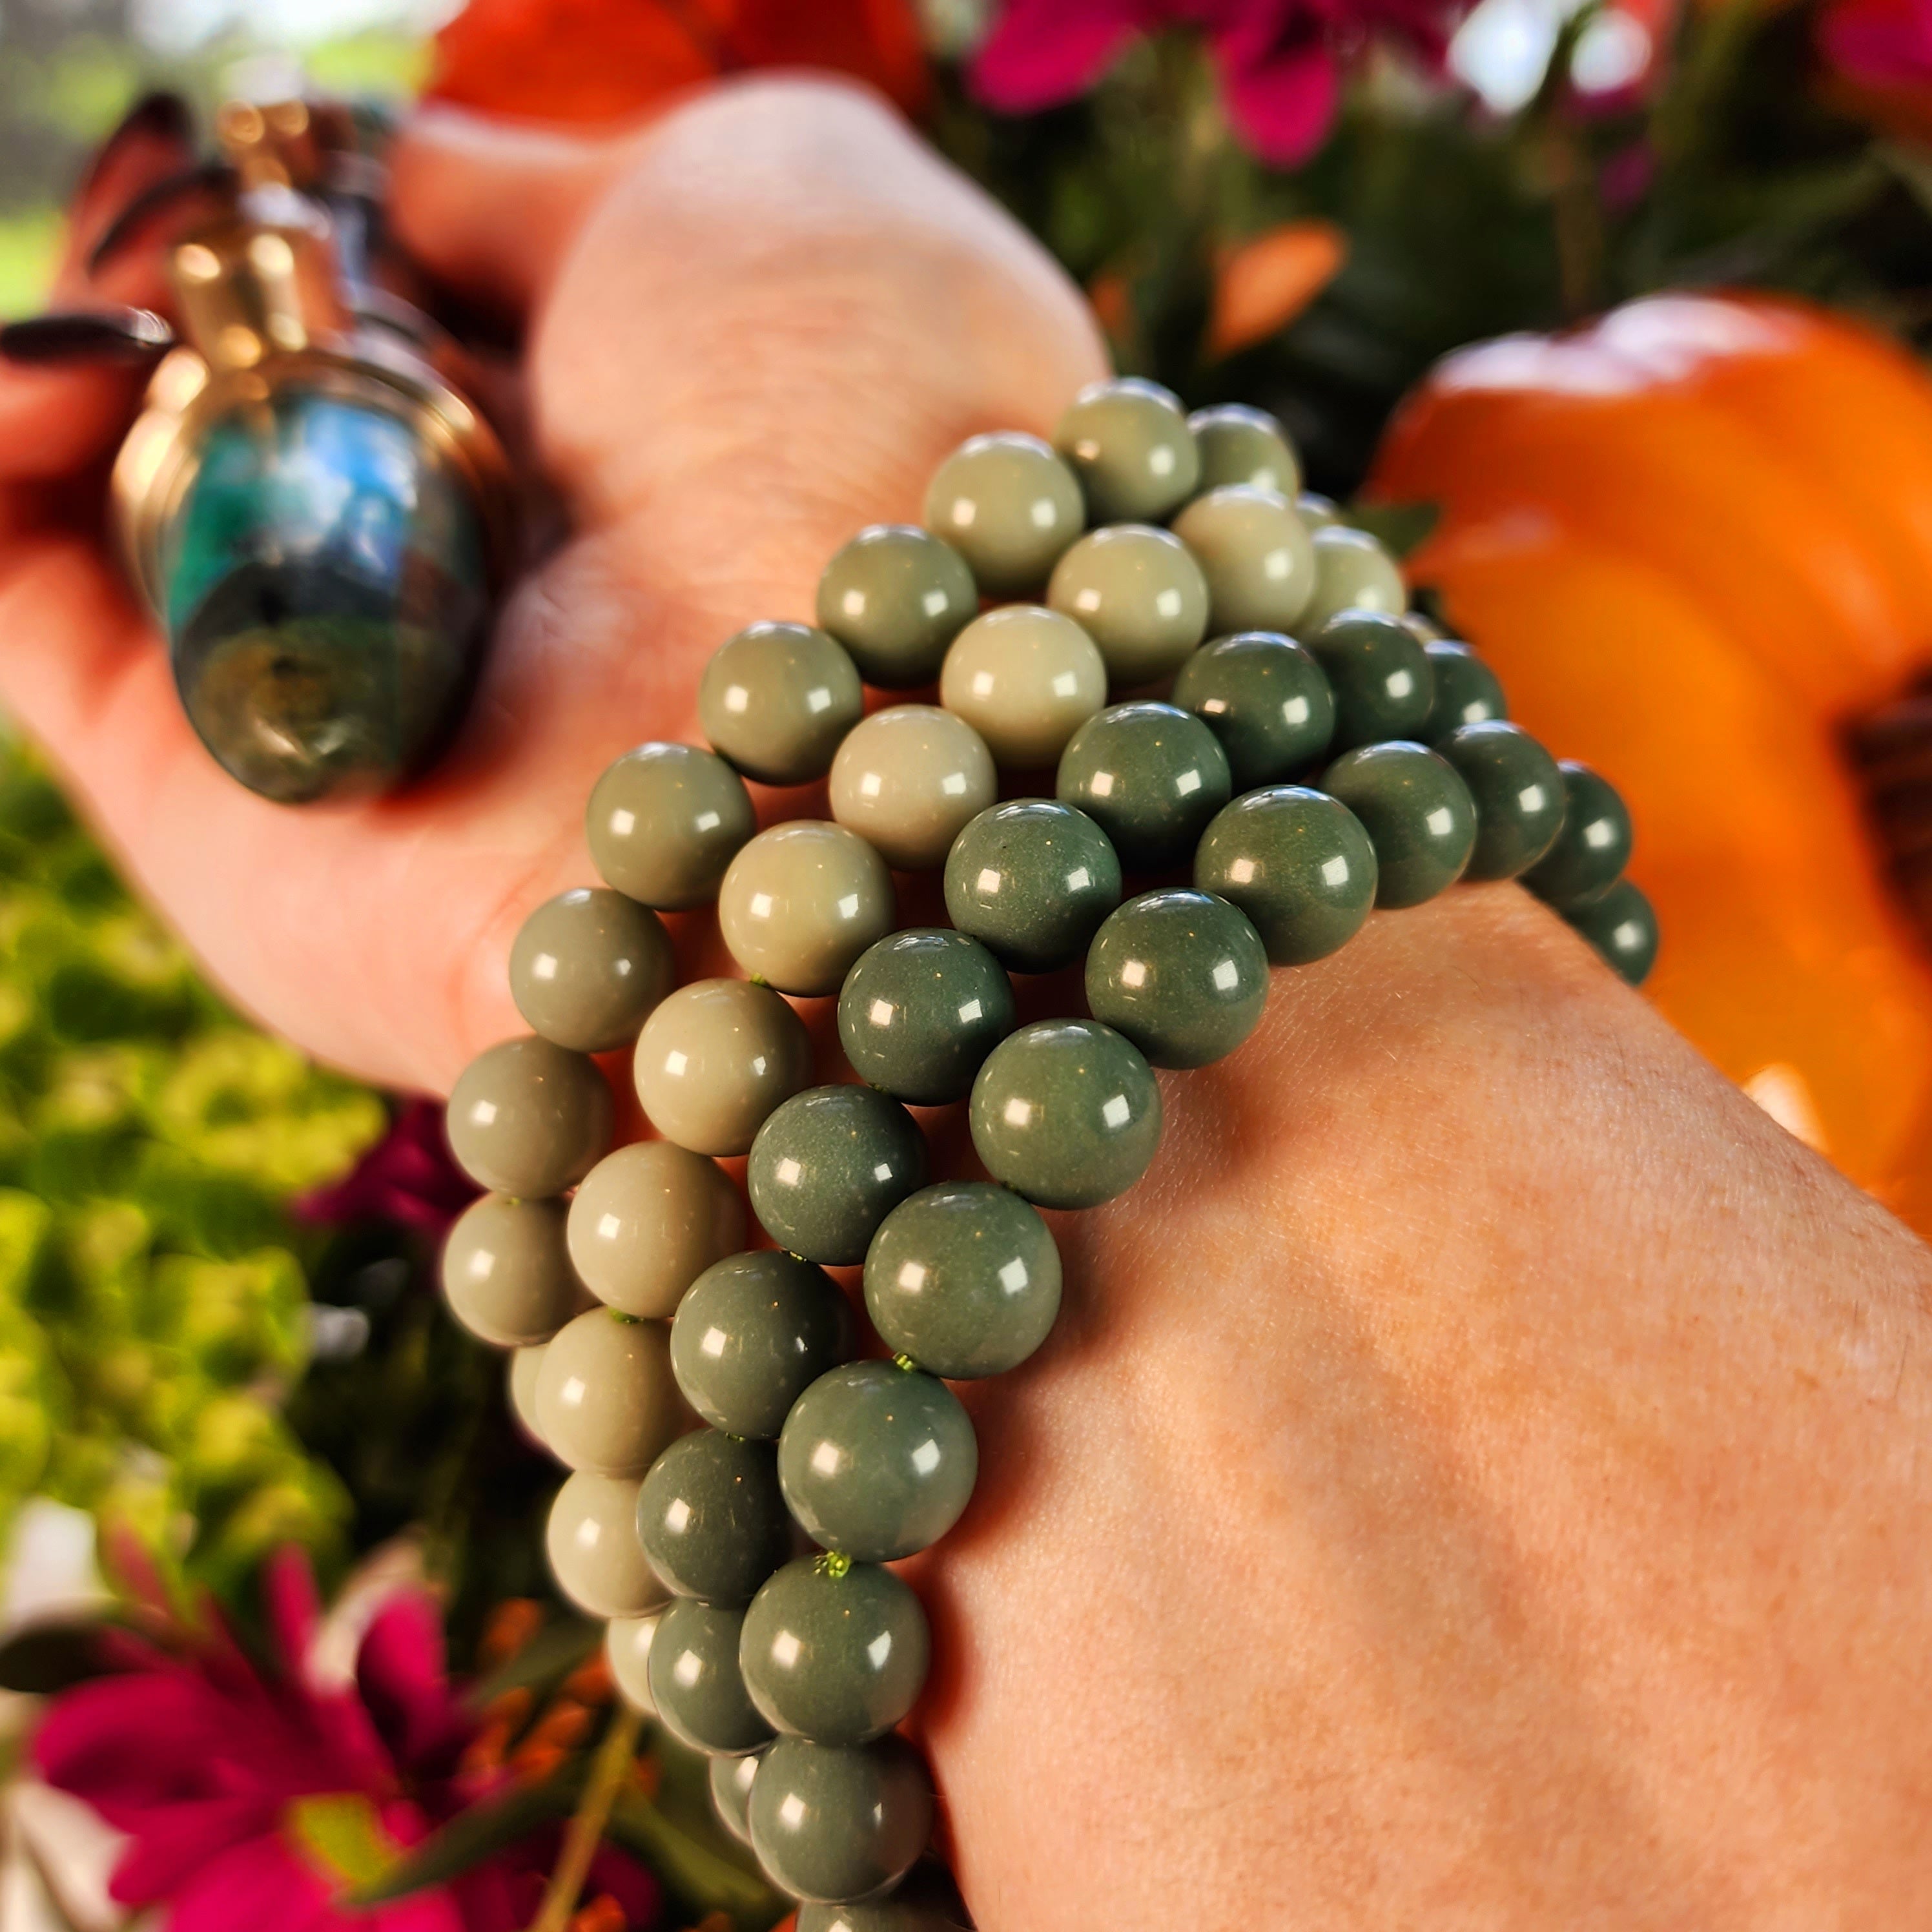 Blue Alashan Agate Bracelet for Chasing your Dreams, Enhanced Memory, Protection & Stress Relief